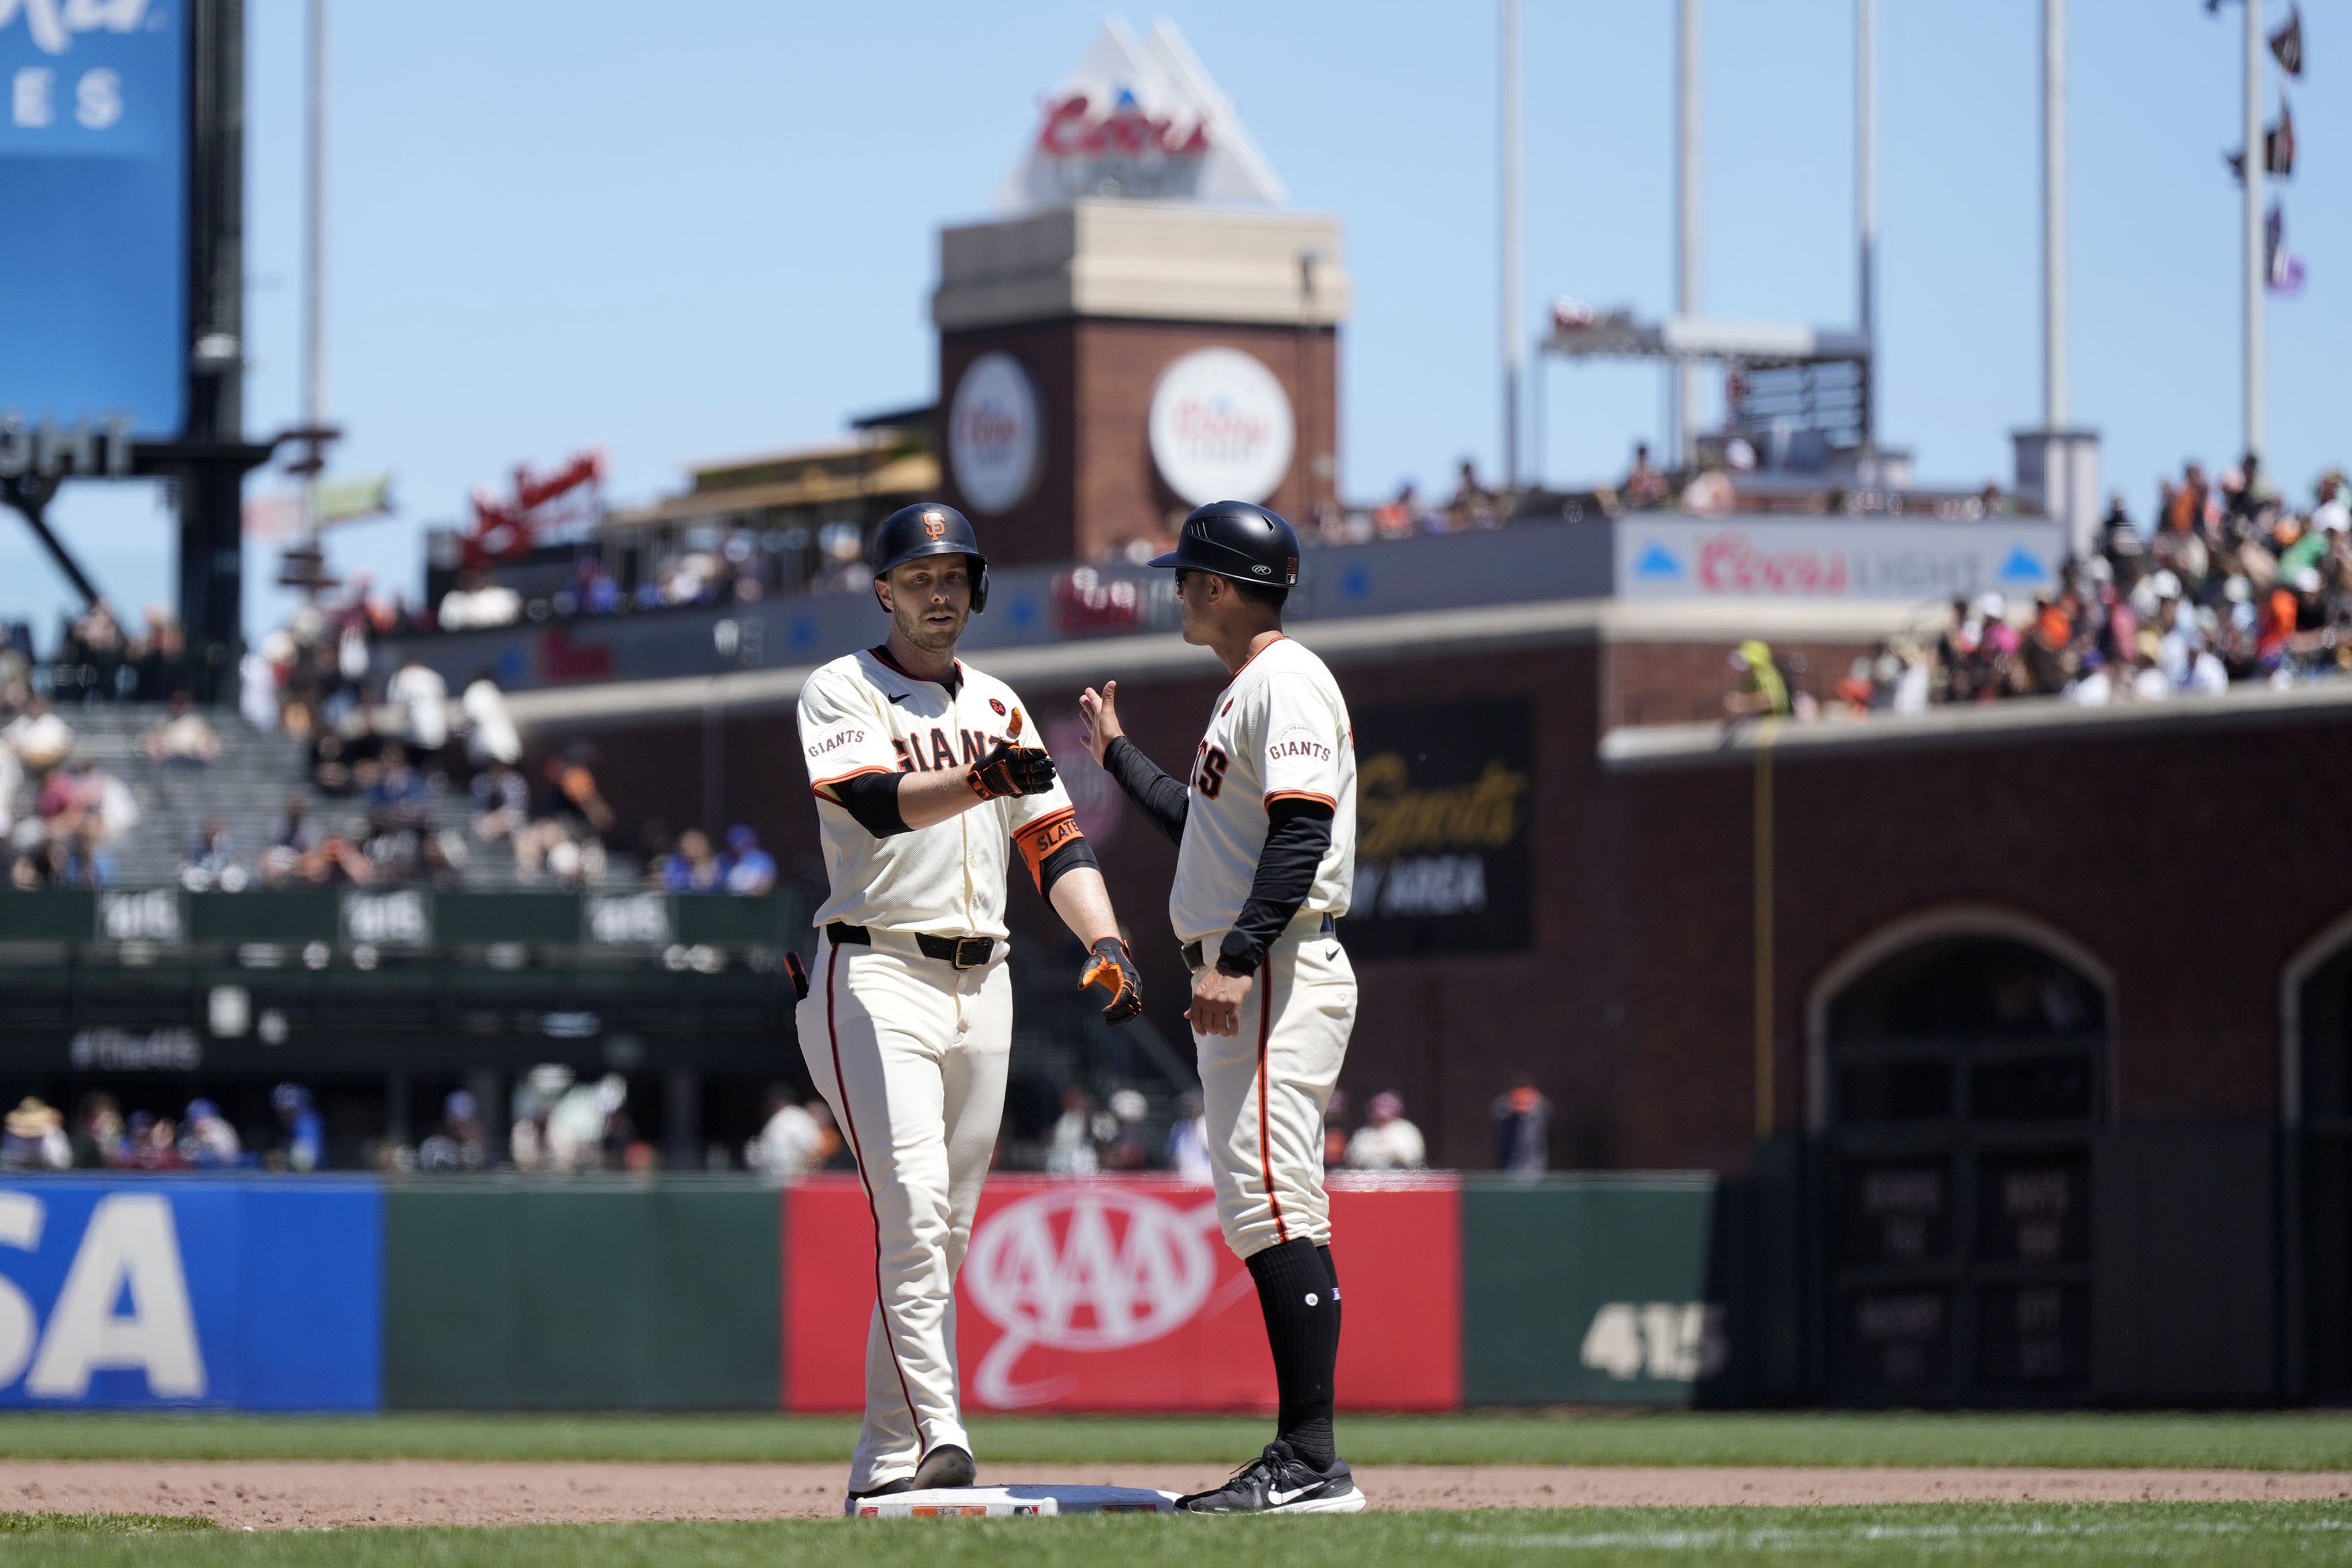 Giants Trade Longest-Tenured Player to NL Wild Card Contender